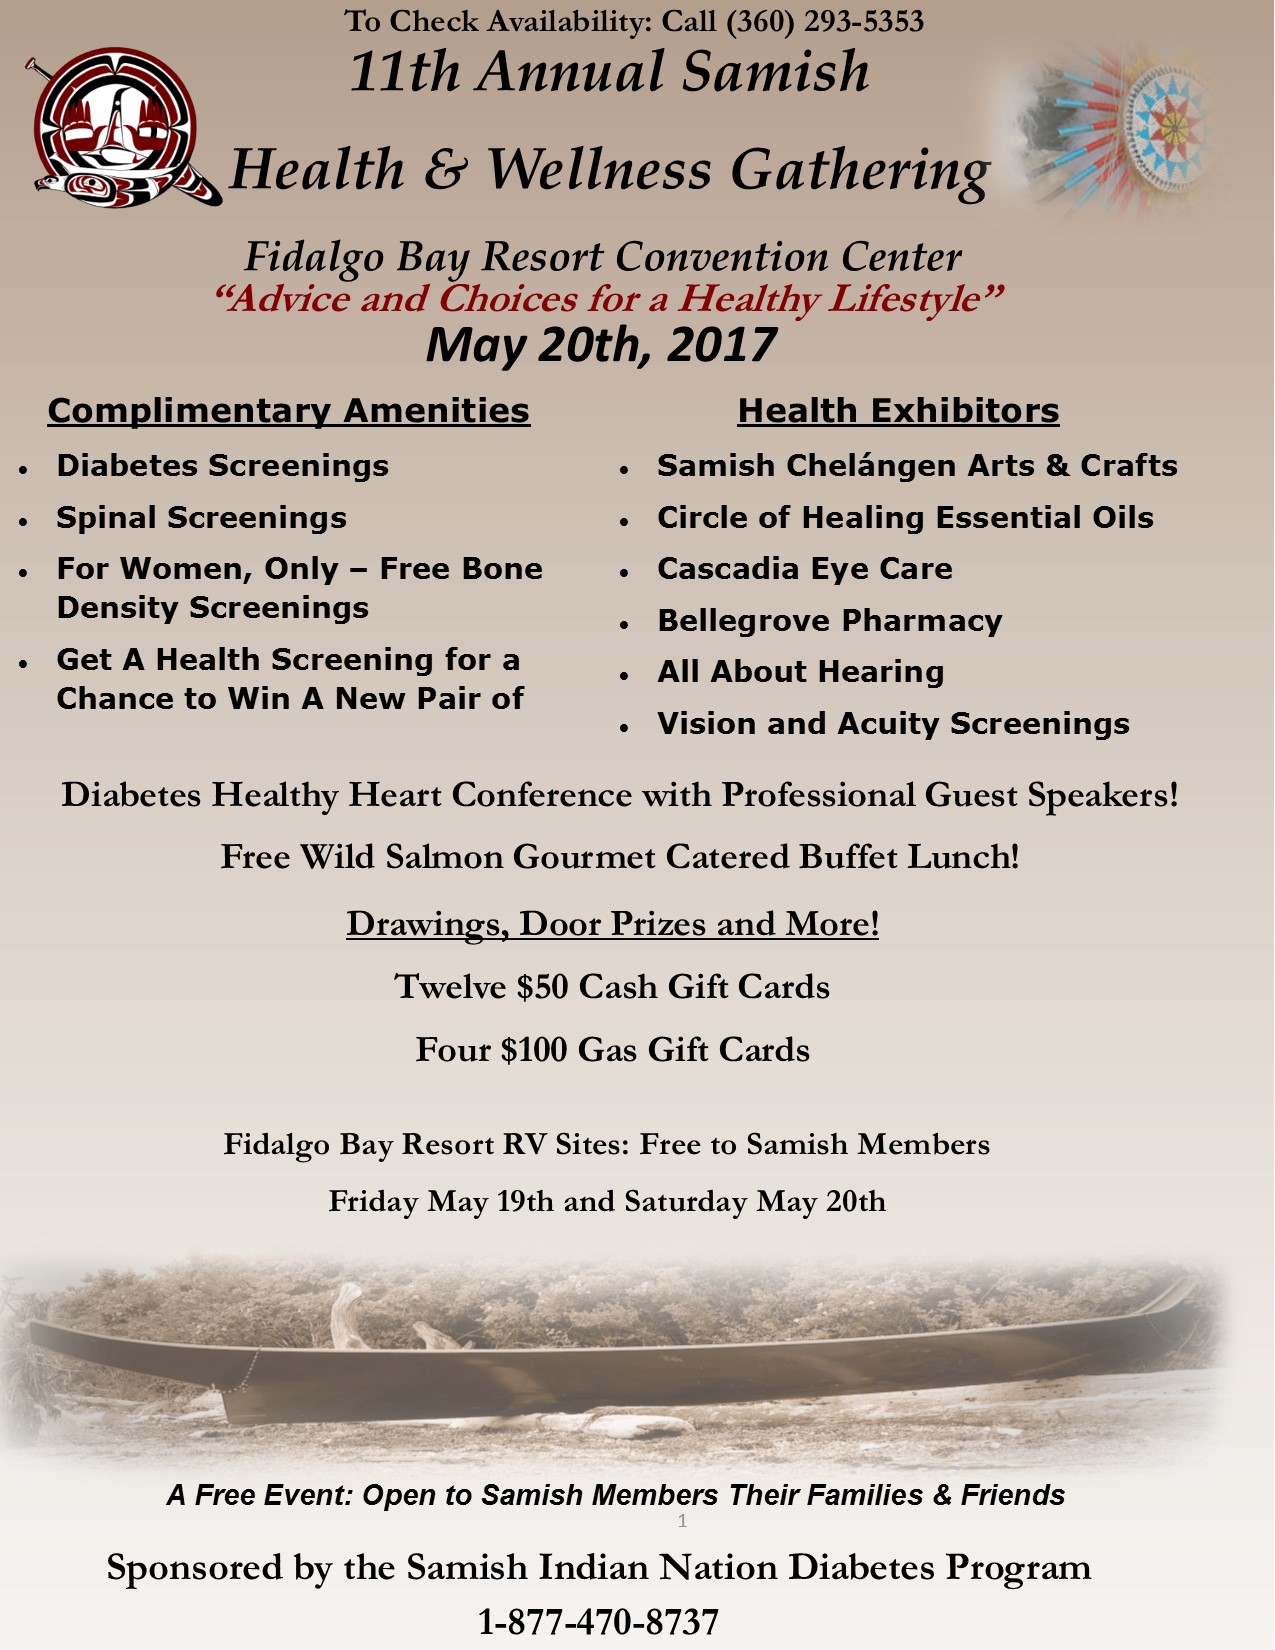 An advertisement flyer listing for the 11th Annual Samish Health & Wellness Gathering at Fidalgo Bay Resort.